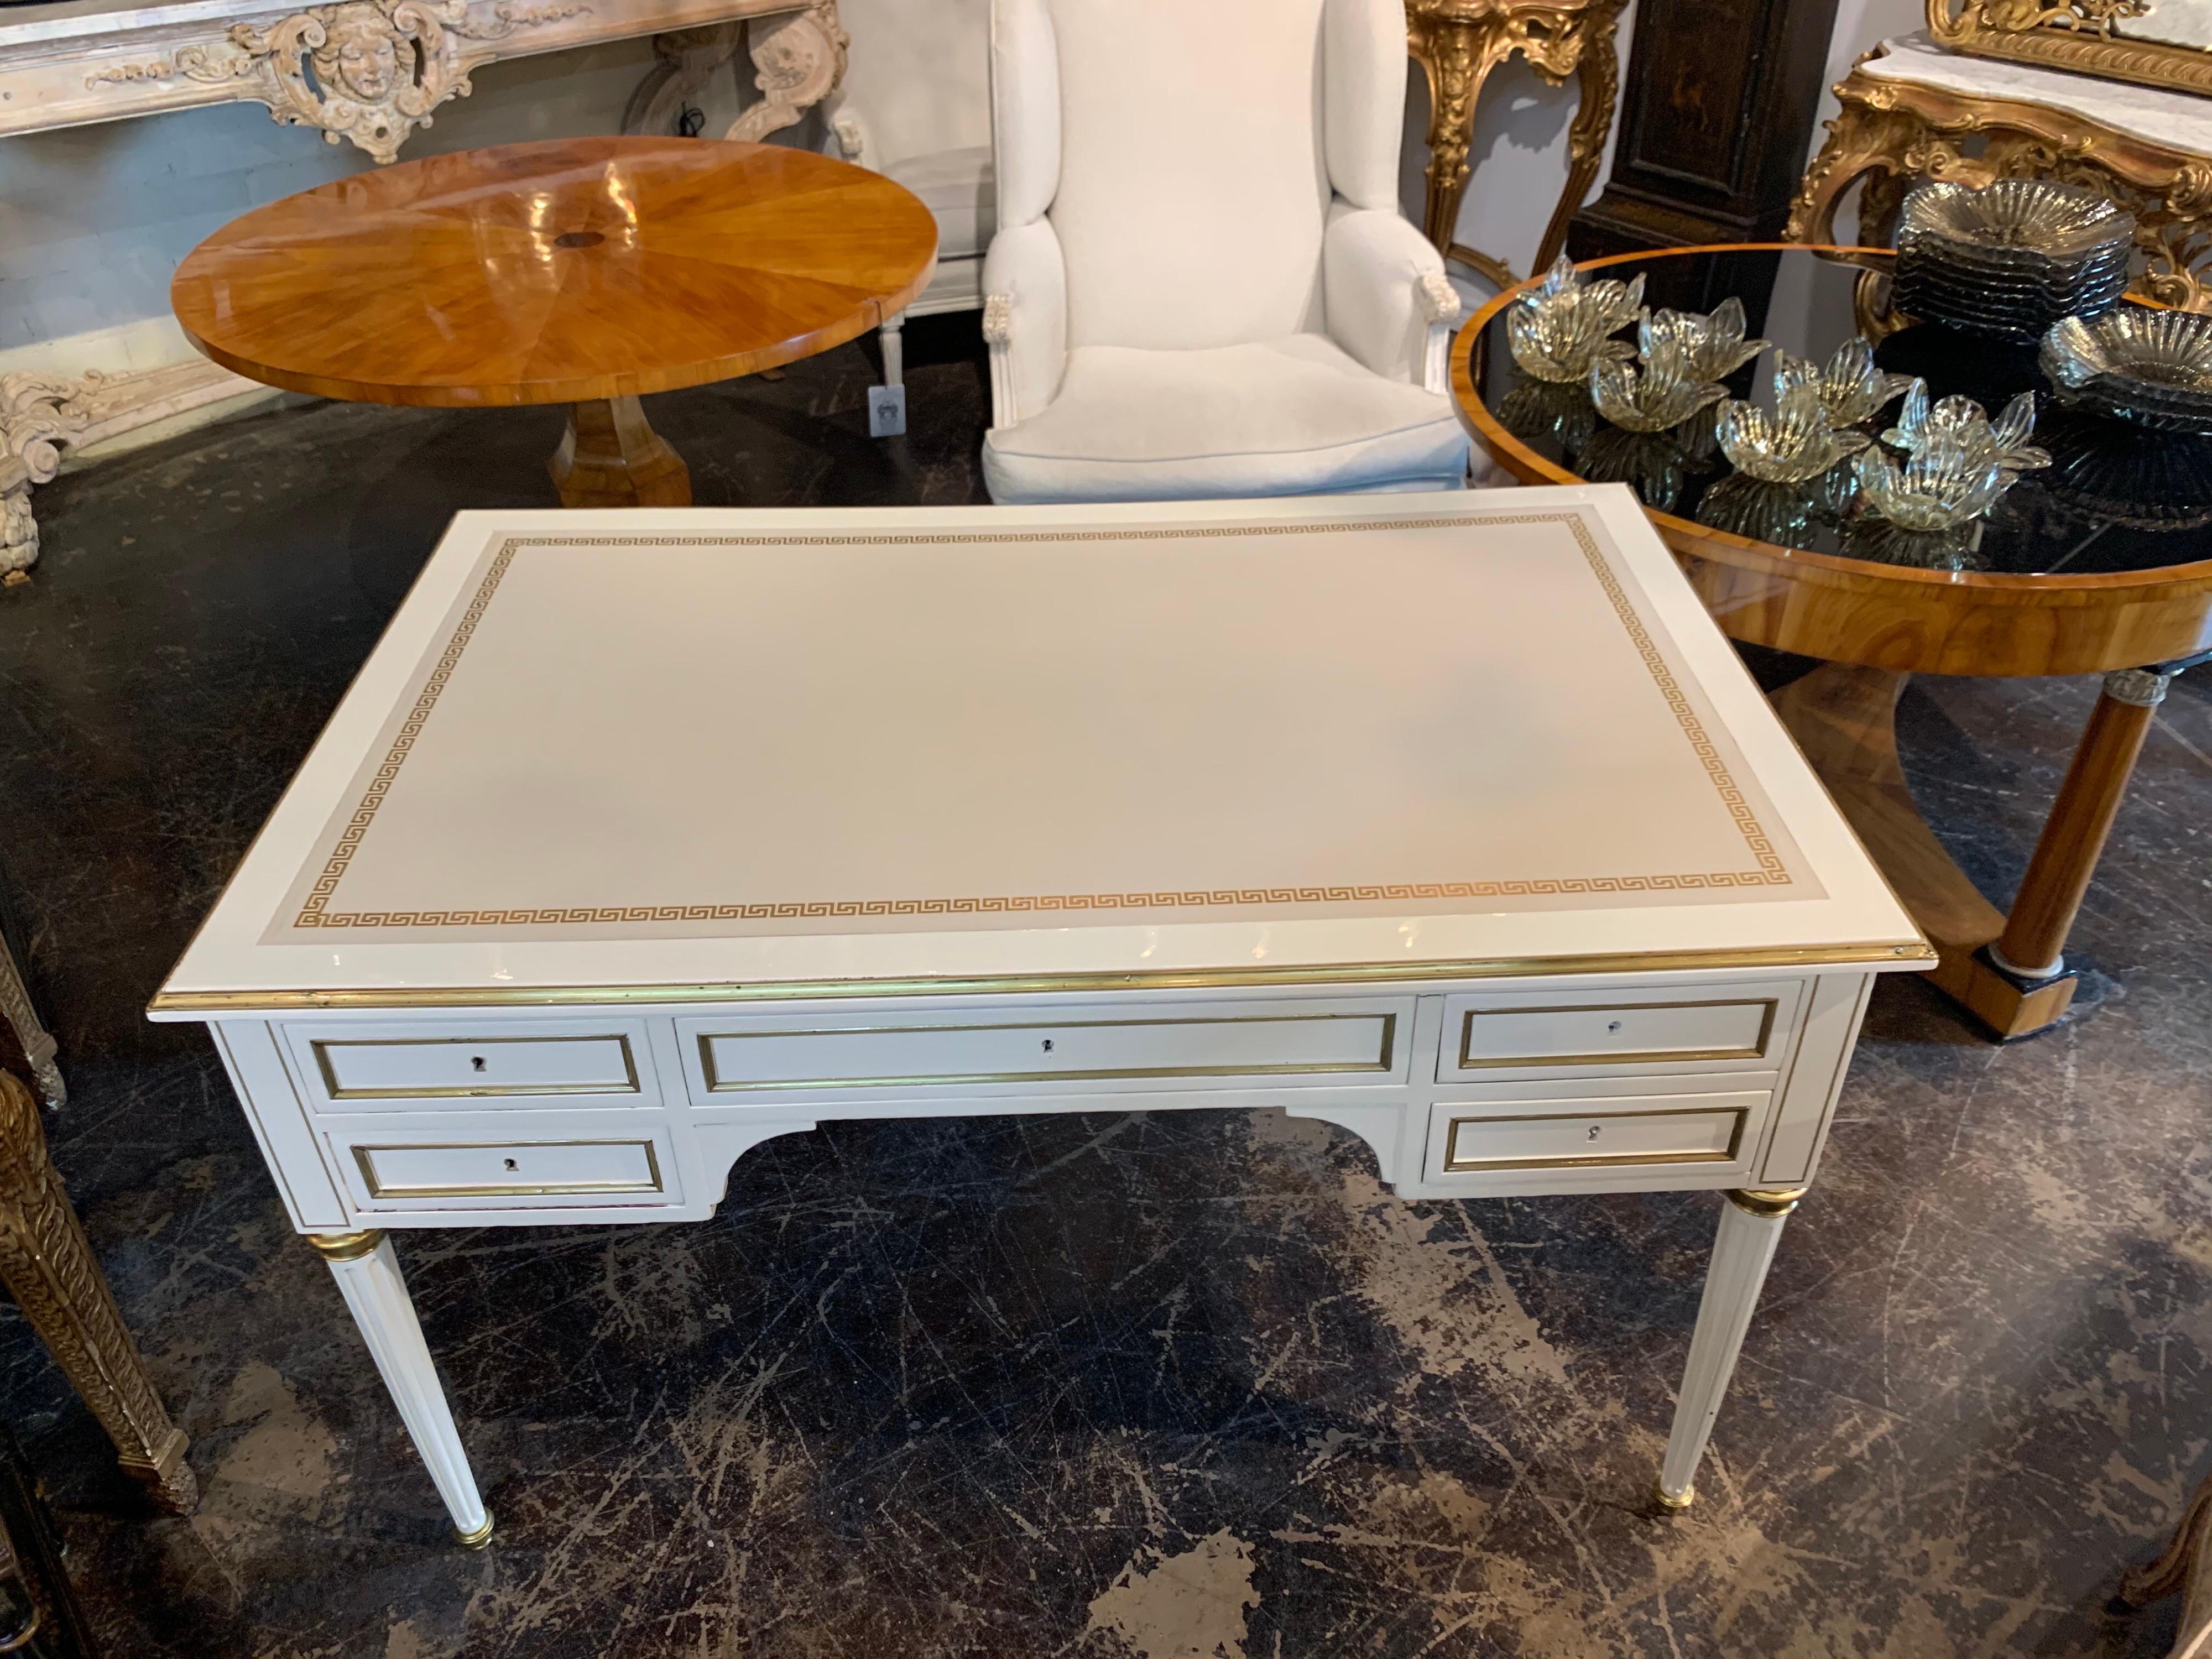 Elegant French Jansen style white lacquered and brass trim desk. Beautiful leather top with Greek key pattern.
A very polished look! Exceptional!